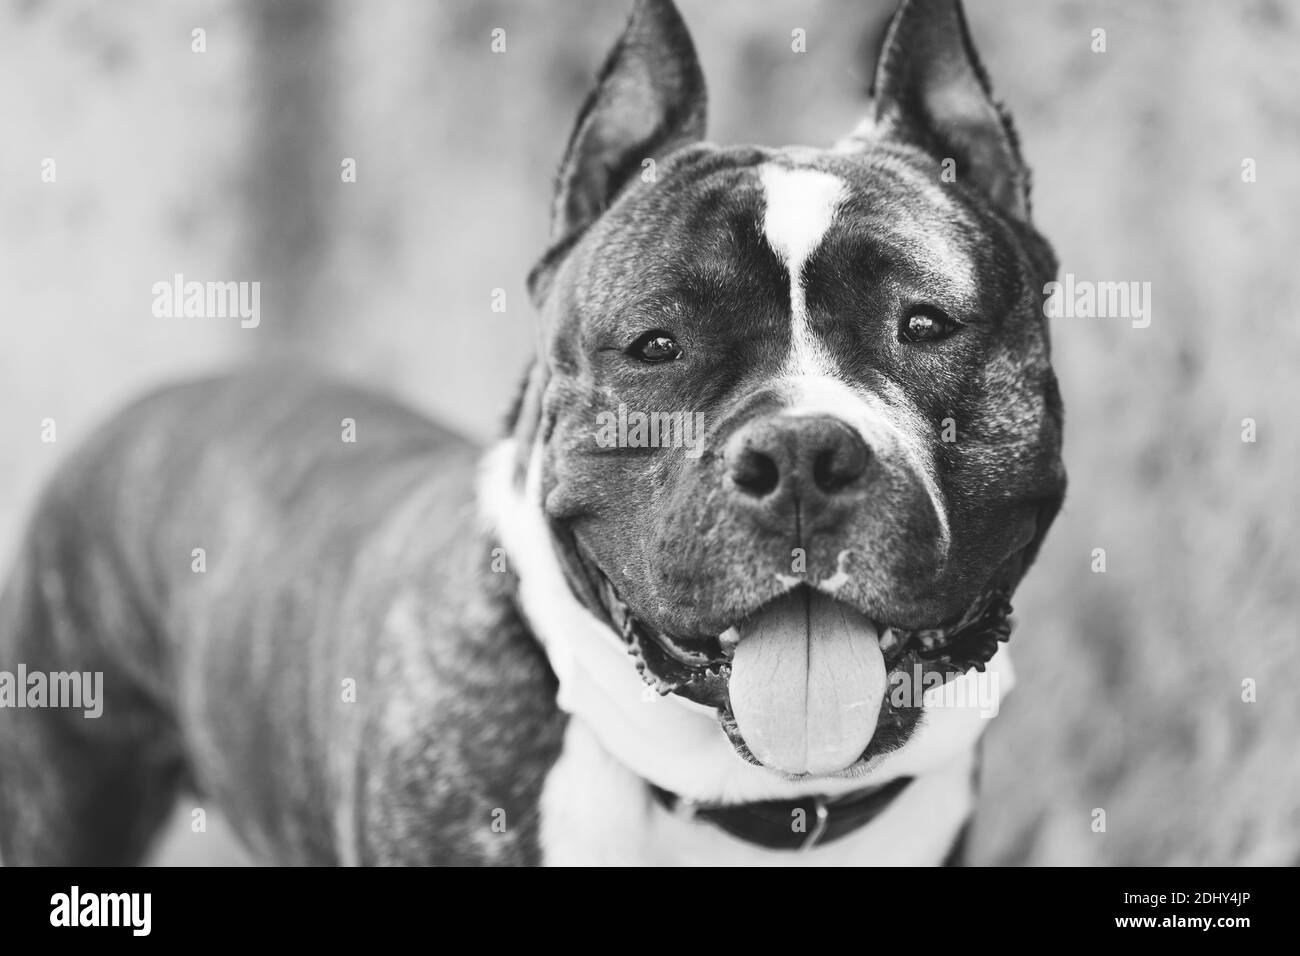 Adult Dog American Staffordshire Terrier Outdoor Close Up. black and white portrait. Stock Photo